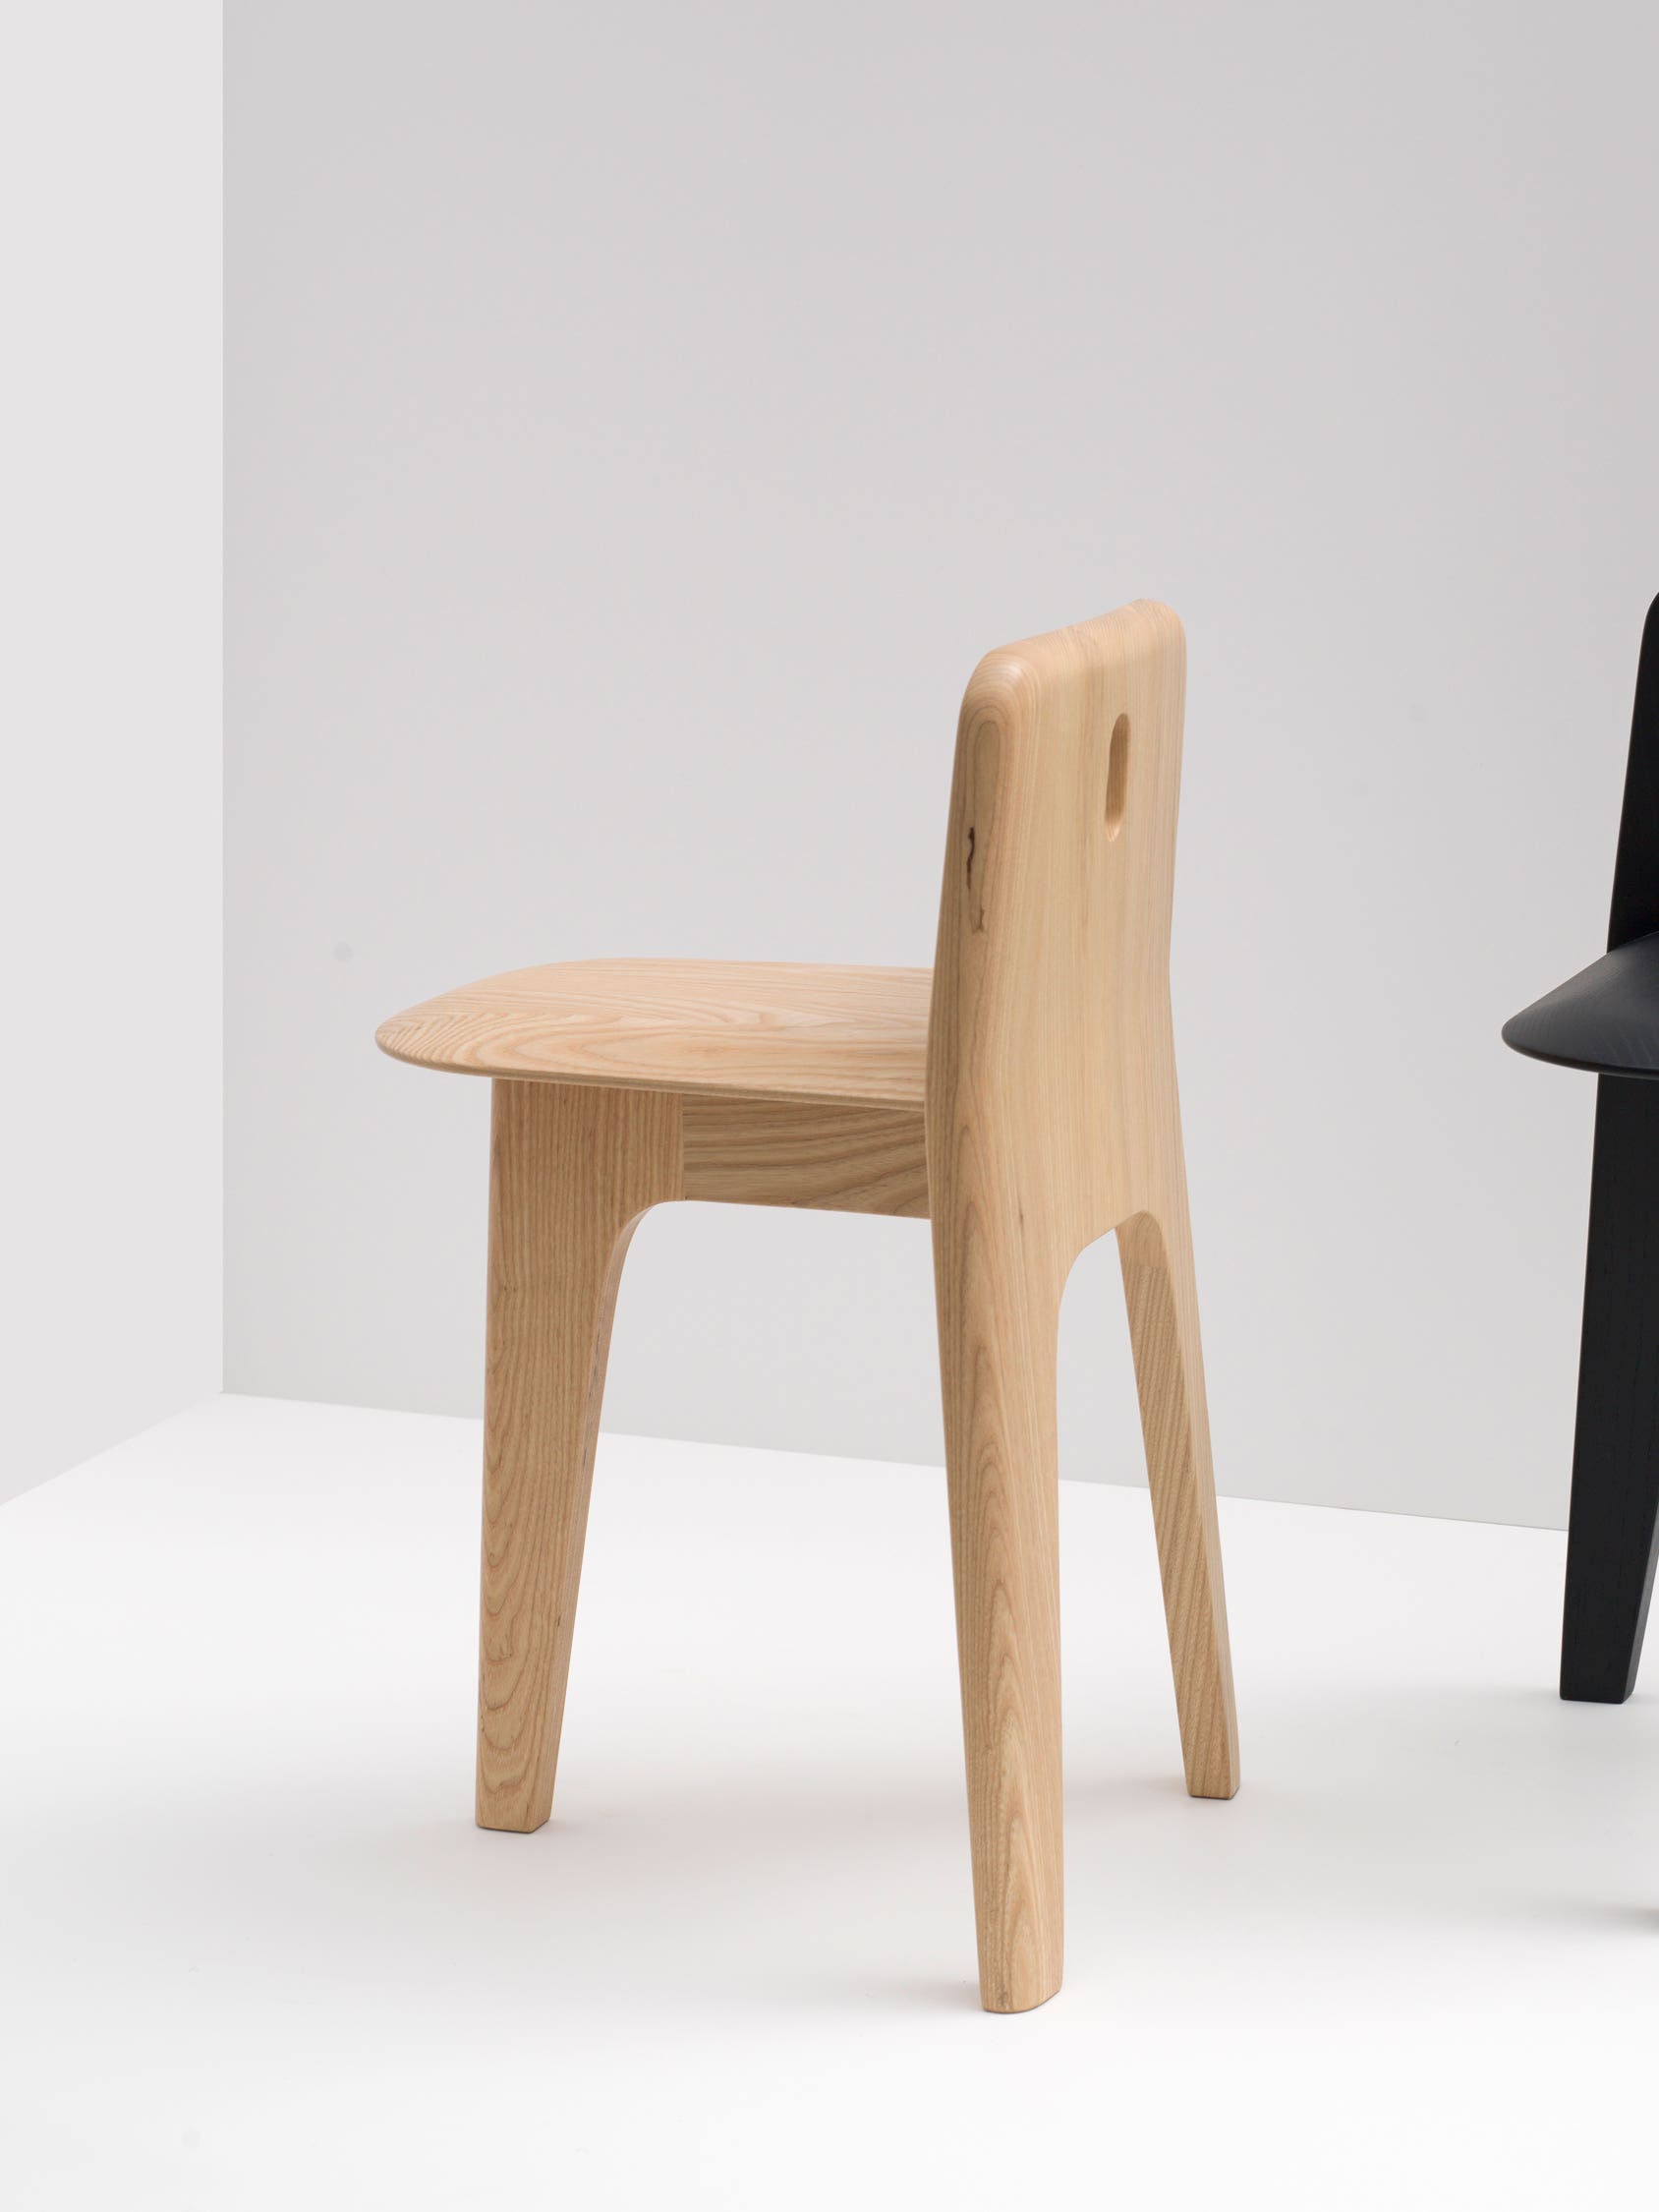 8 Statement Chairs Like You’ve Never Seen Before